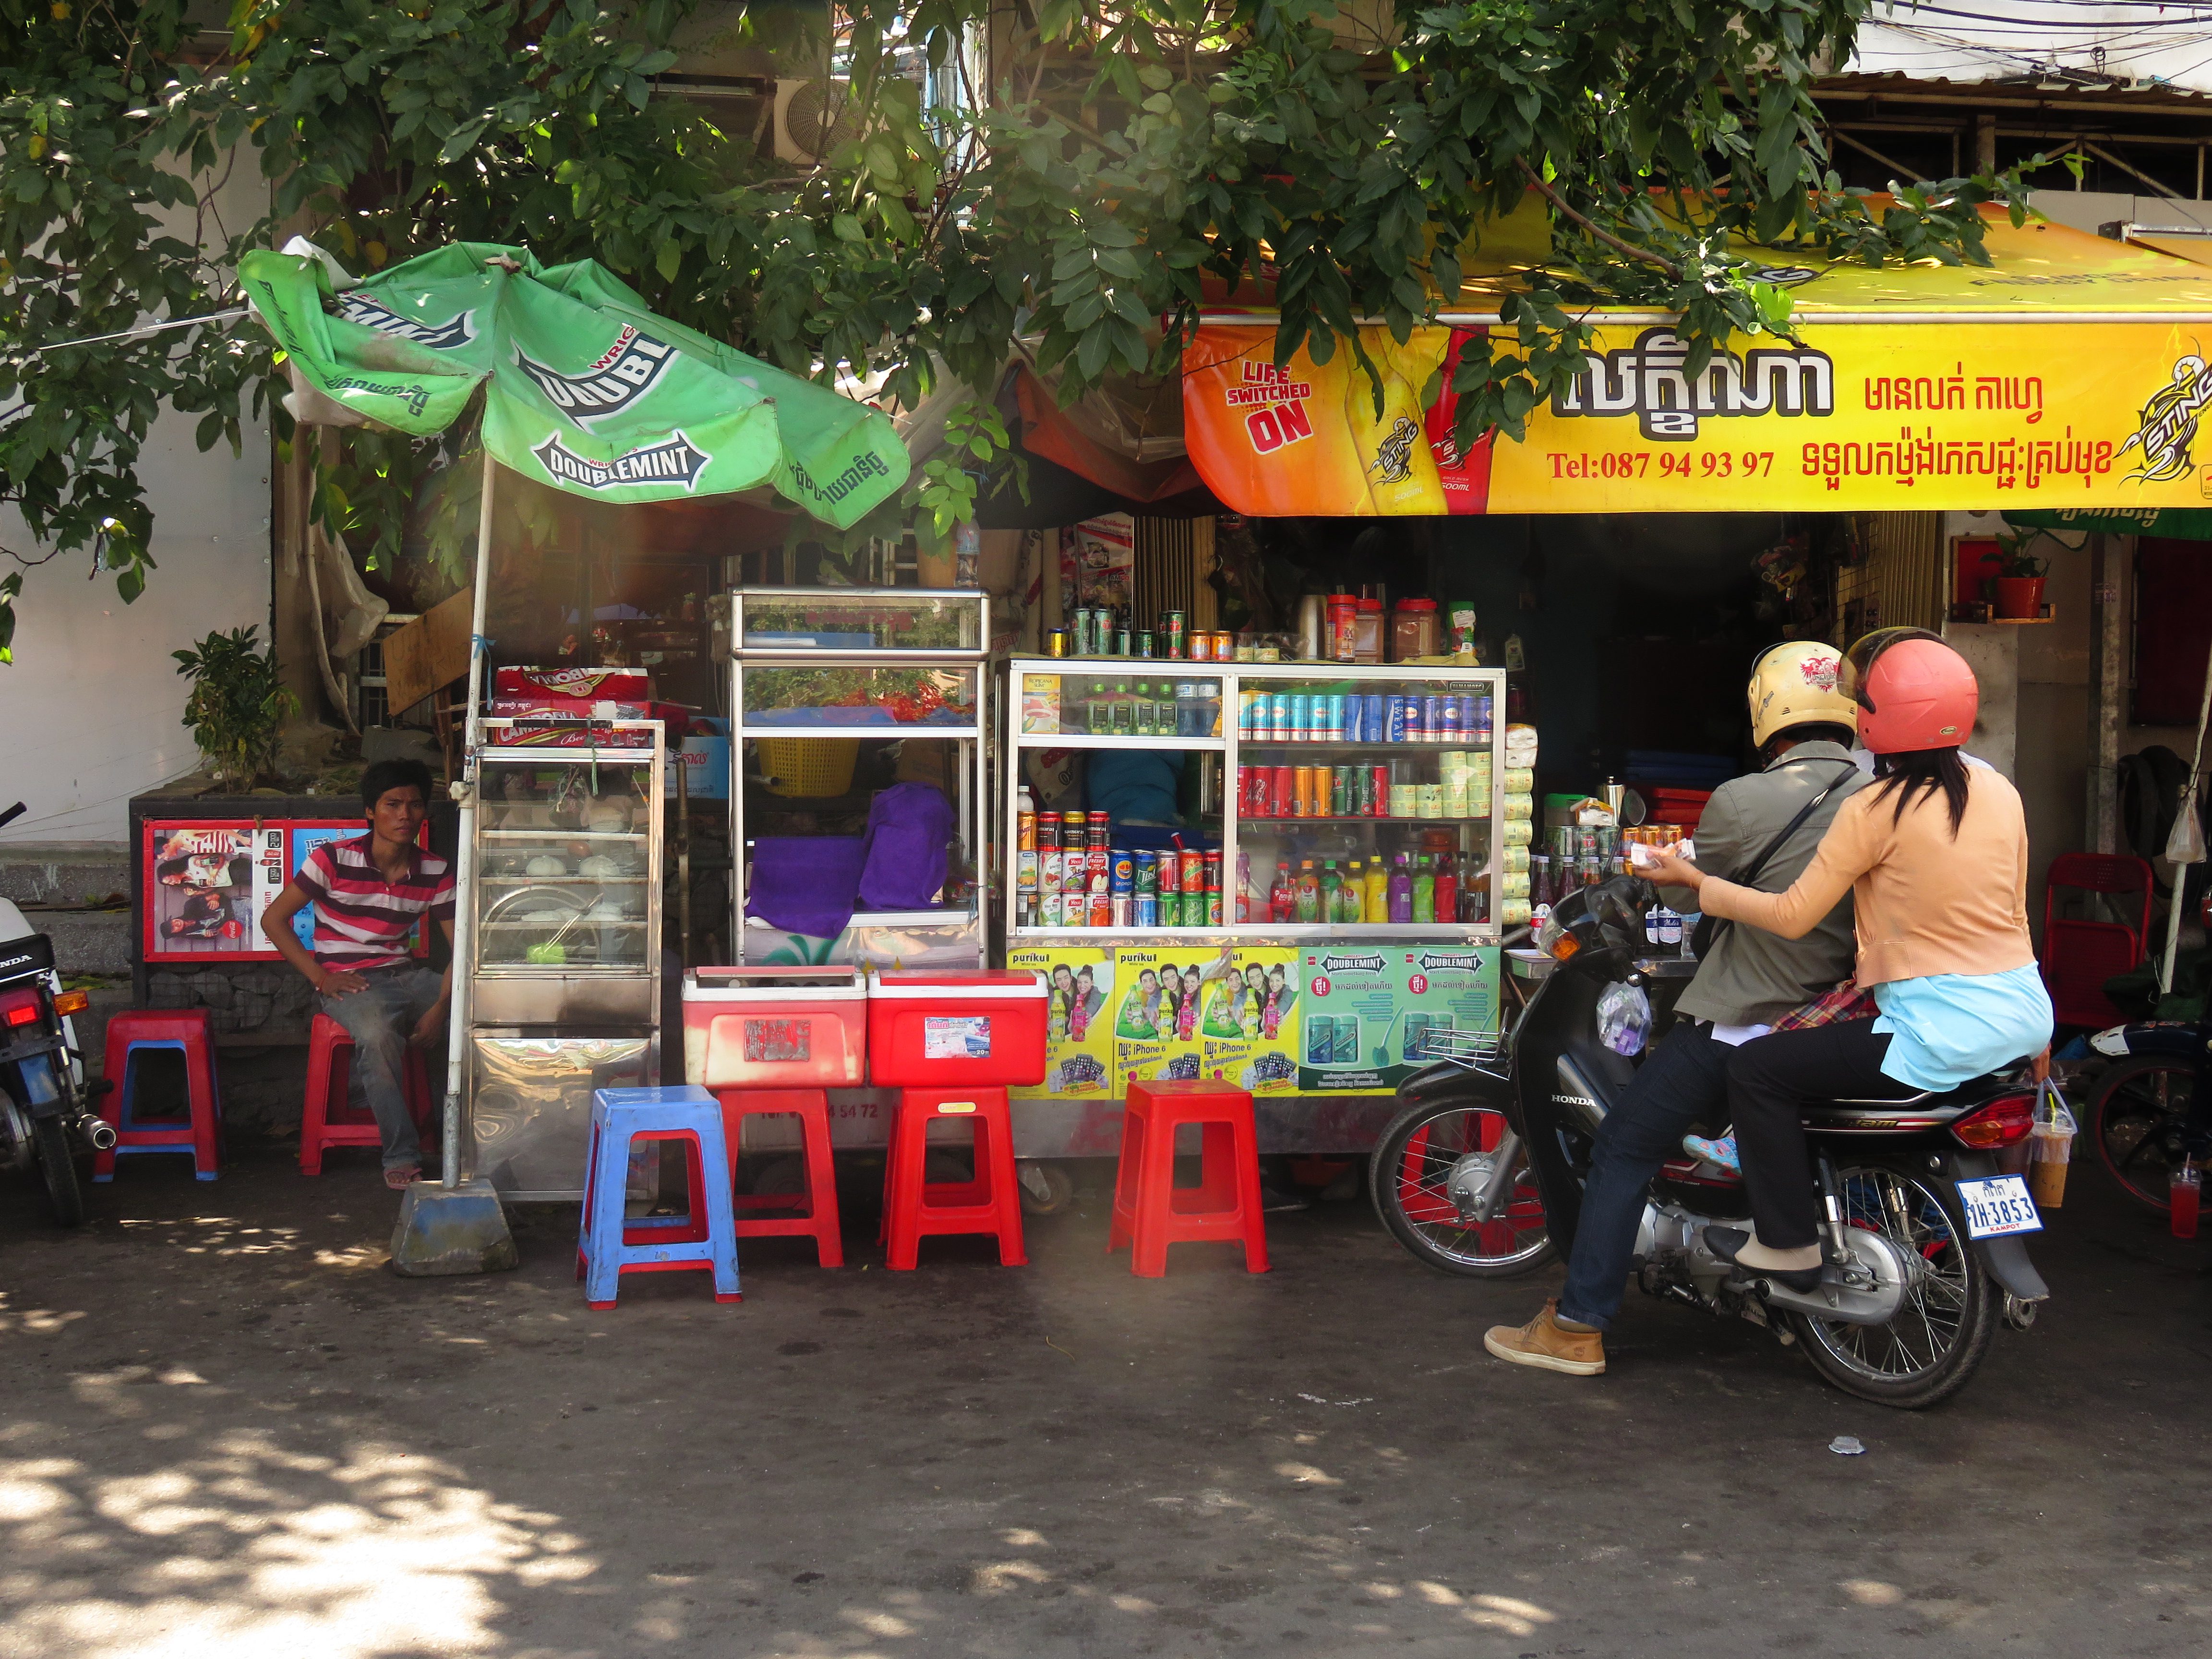 Coffee Places in Phnom Penh